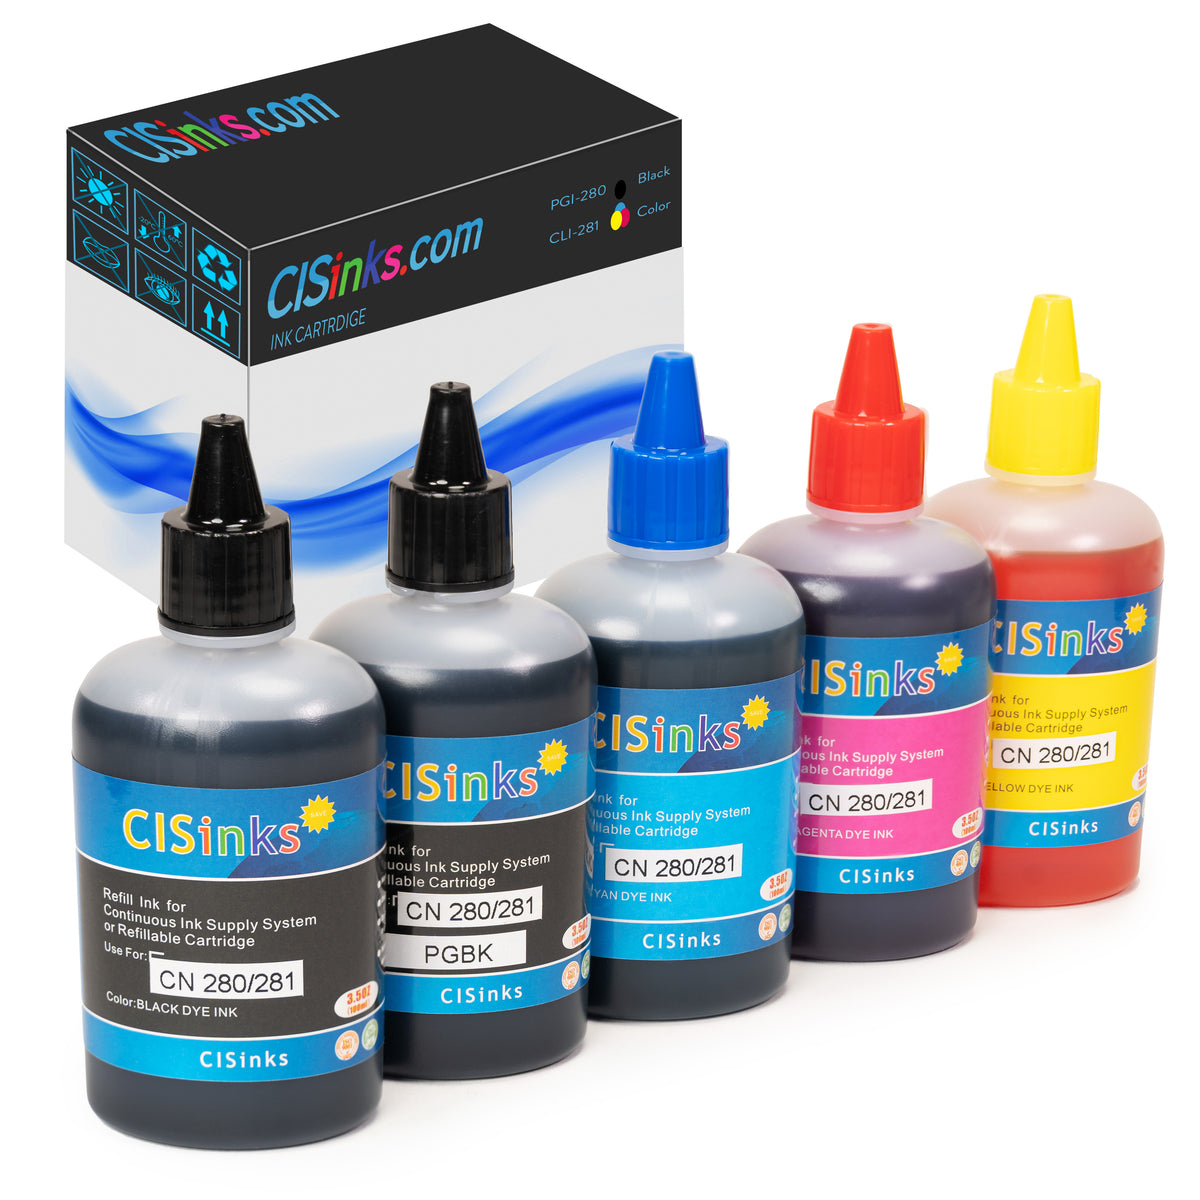 5x100ml Universal Dye Ink Refill Bottle Set - 5 Color PHBLK  (Black, Yellow, Cyan, Magenta, Photo Black)  for Epson, Canon, HP, Brother and all Major Brand Inkjet Printers